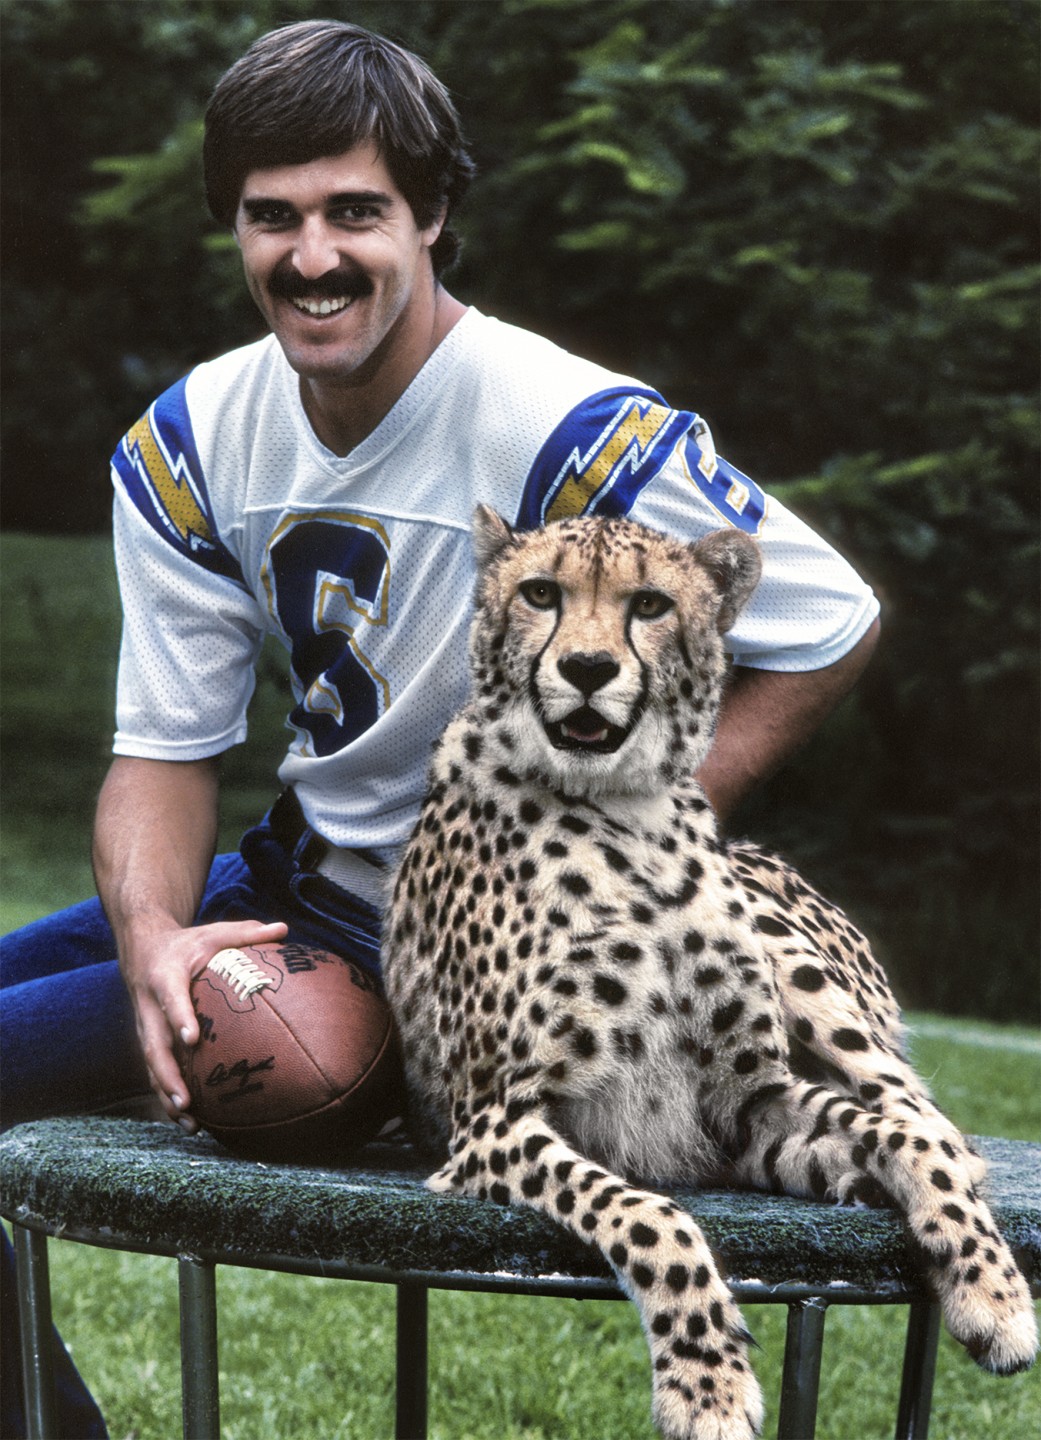 San Diego Chargers placekicker Rolf Benirschke set out to make a difference for endangered species with his Kicks for Critters fundraising drive.